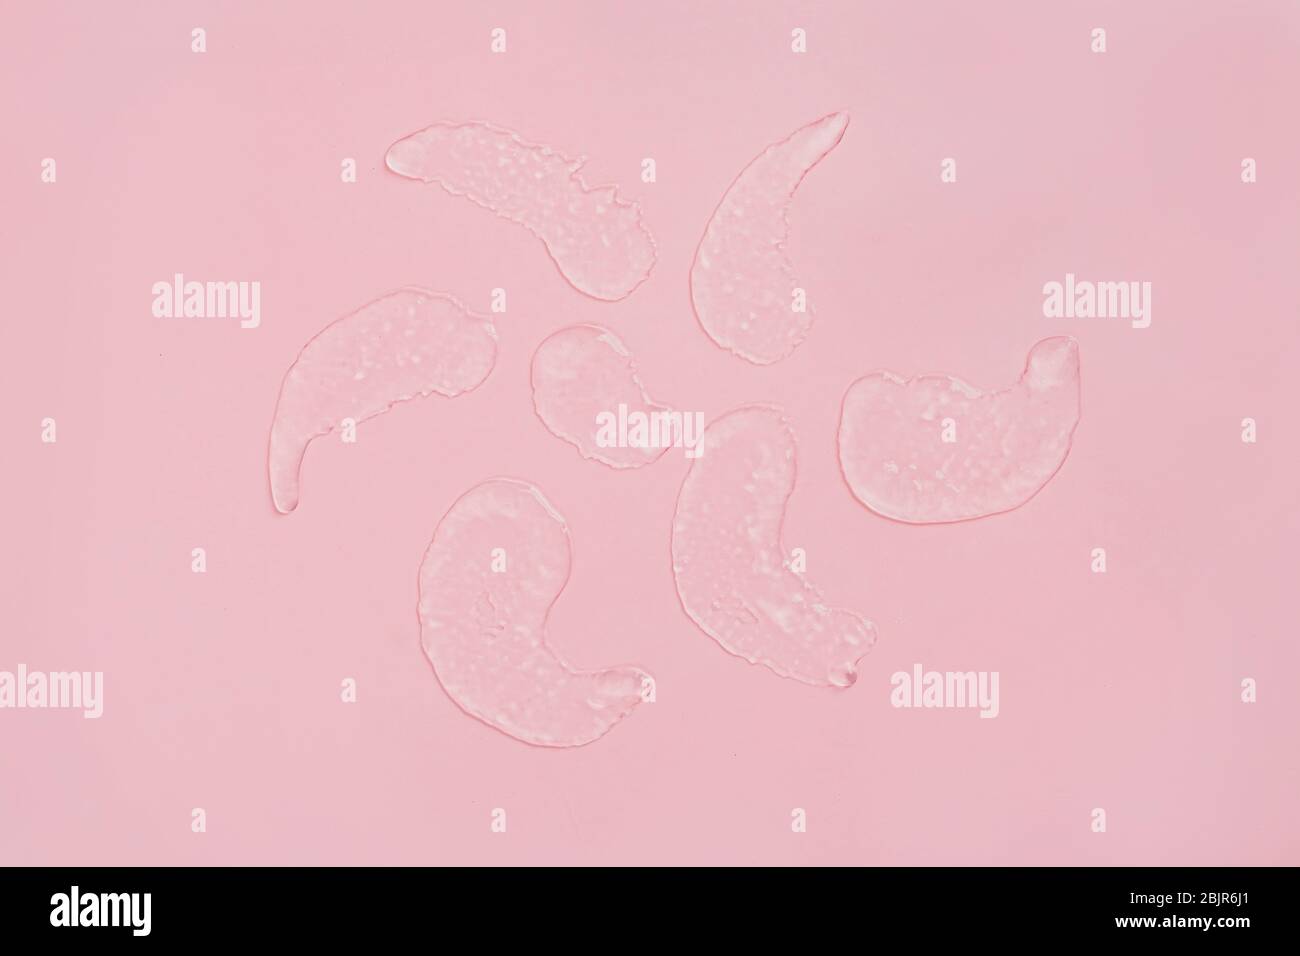 Squeezed cosmetic clear cream gel texture. Close up photo of transparent drop of skin care product. High Quality transparent gel with bubbles closeup on pink background. Stock Photo